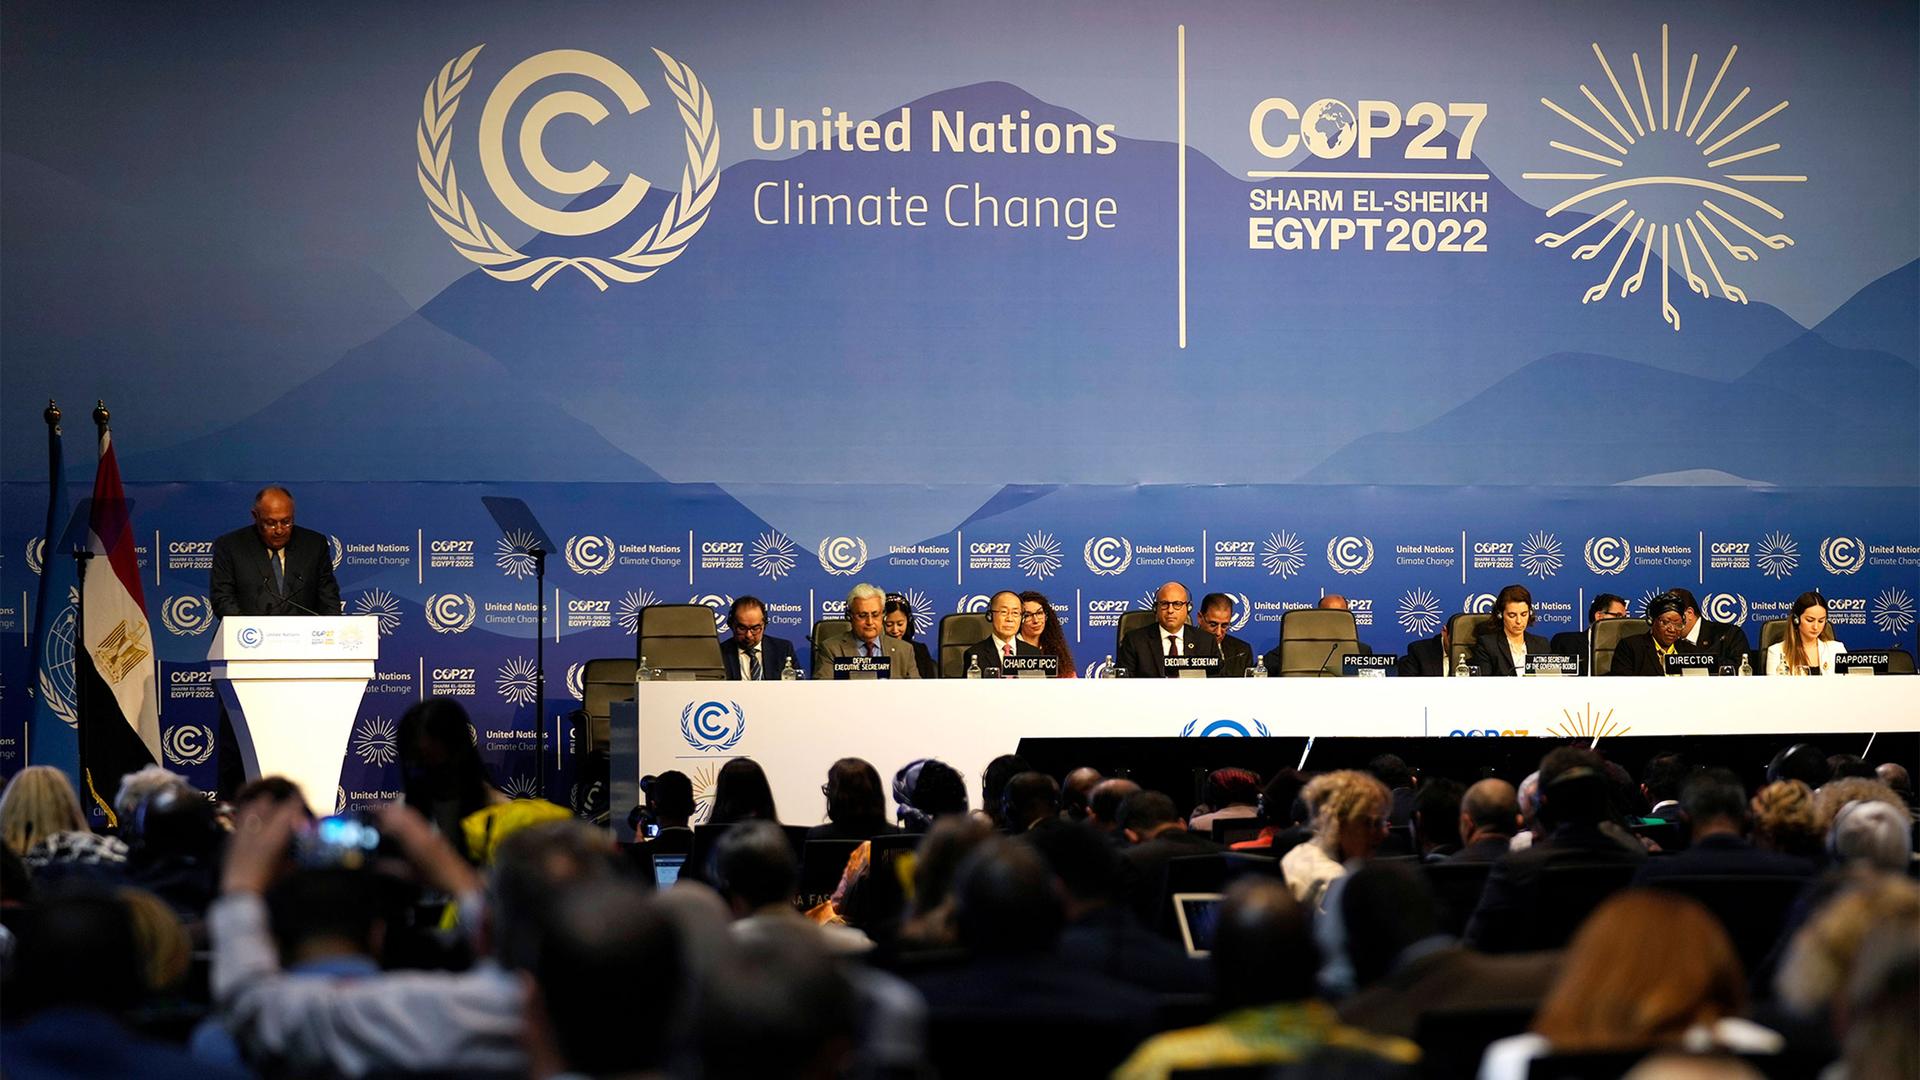 Sameh Shoukry, president of the COP27 climate summit, left, speaks during an opening session at the COP27 UN Climate Summit in Sharm el-Sheikh, Egypt